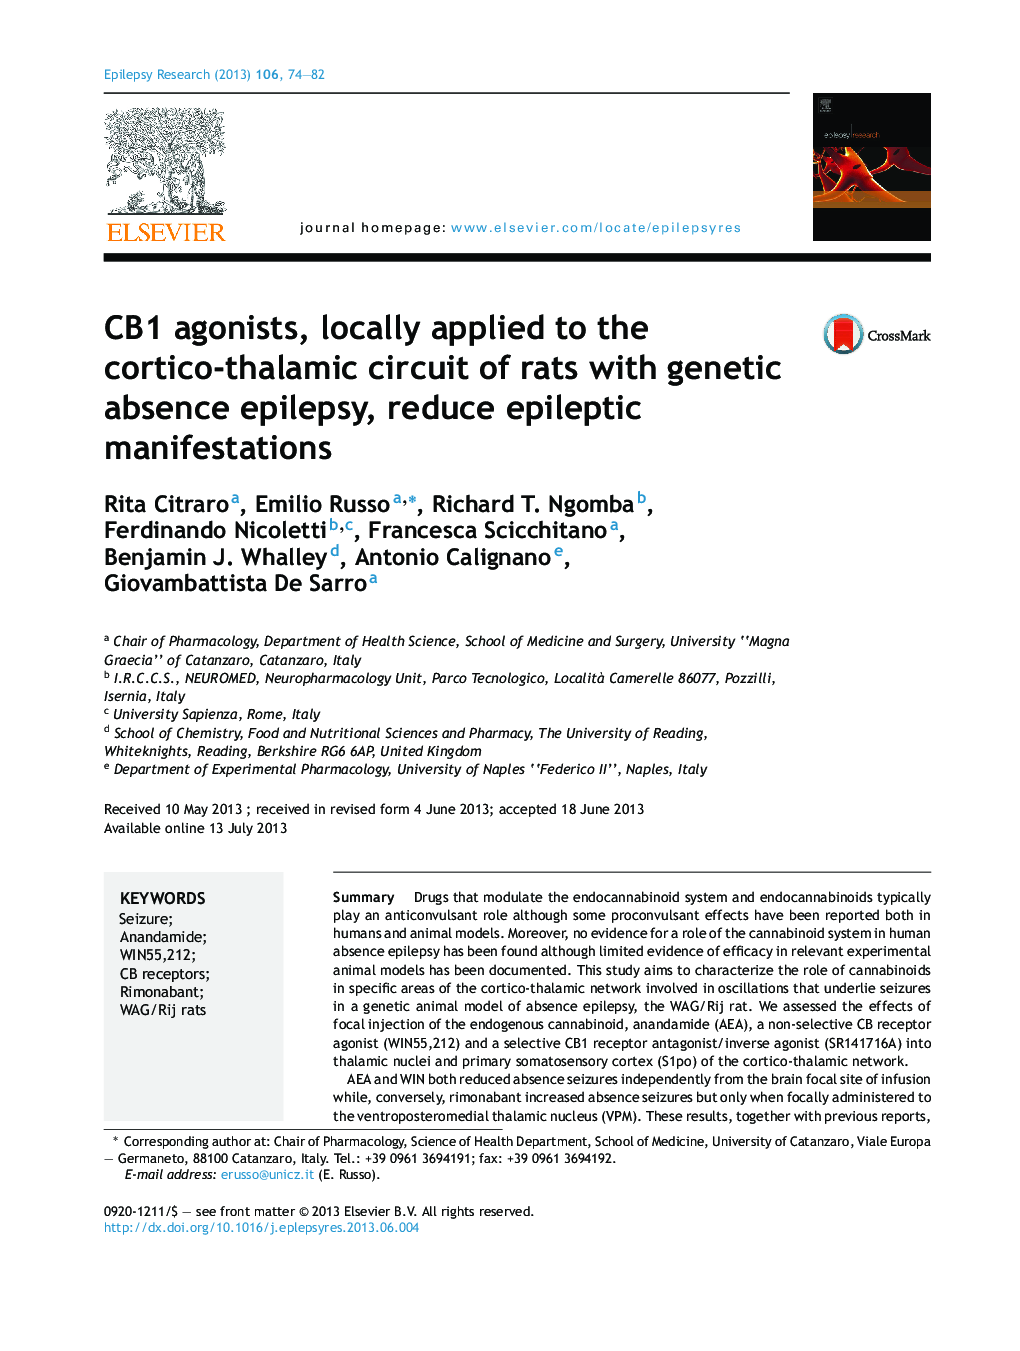 CB1 agonists, locally applied to the cortico-thalamic circuit of rats with genetic absence epilepsy, reduce epileptic manifestations